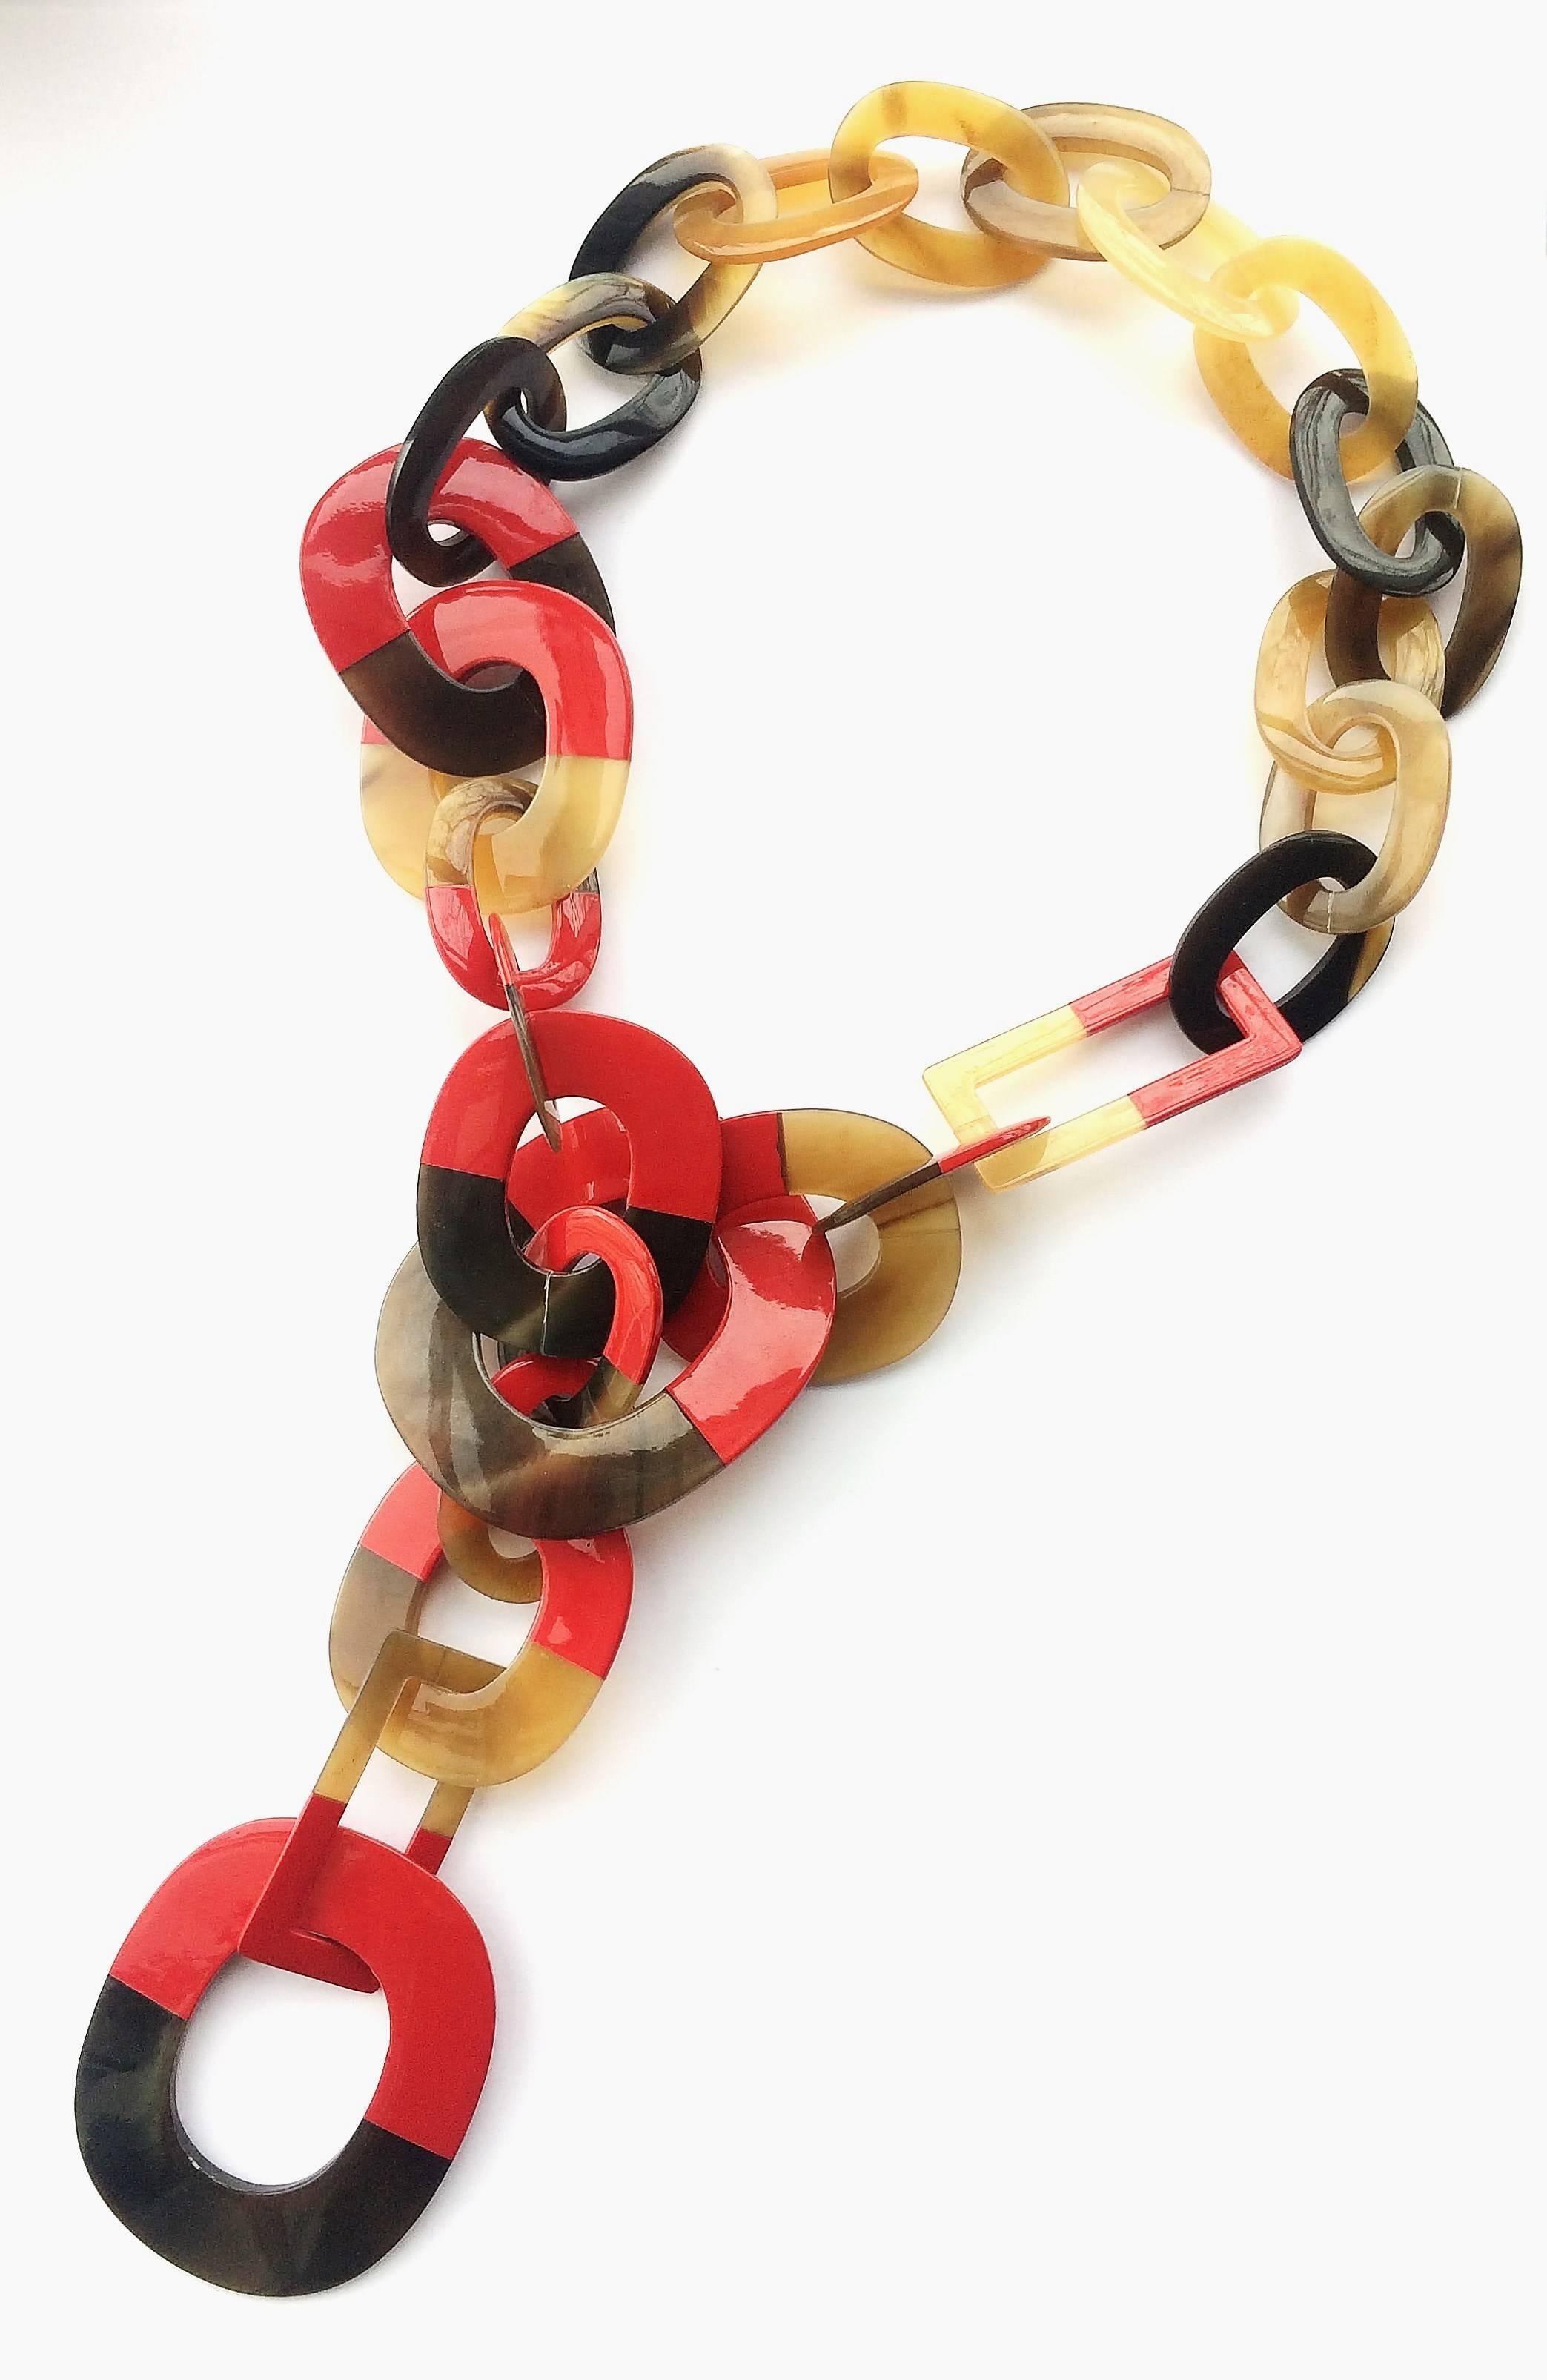 Highly wearable and versatile unsigned sautoir necklace by Hermes from recent years, made from high quality horn that has been lacquered, in this instance, in red.Most links are fully 'sealed', others have a 'join' in the link.
Lustrous and